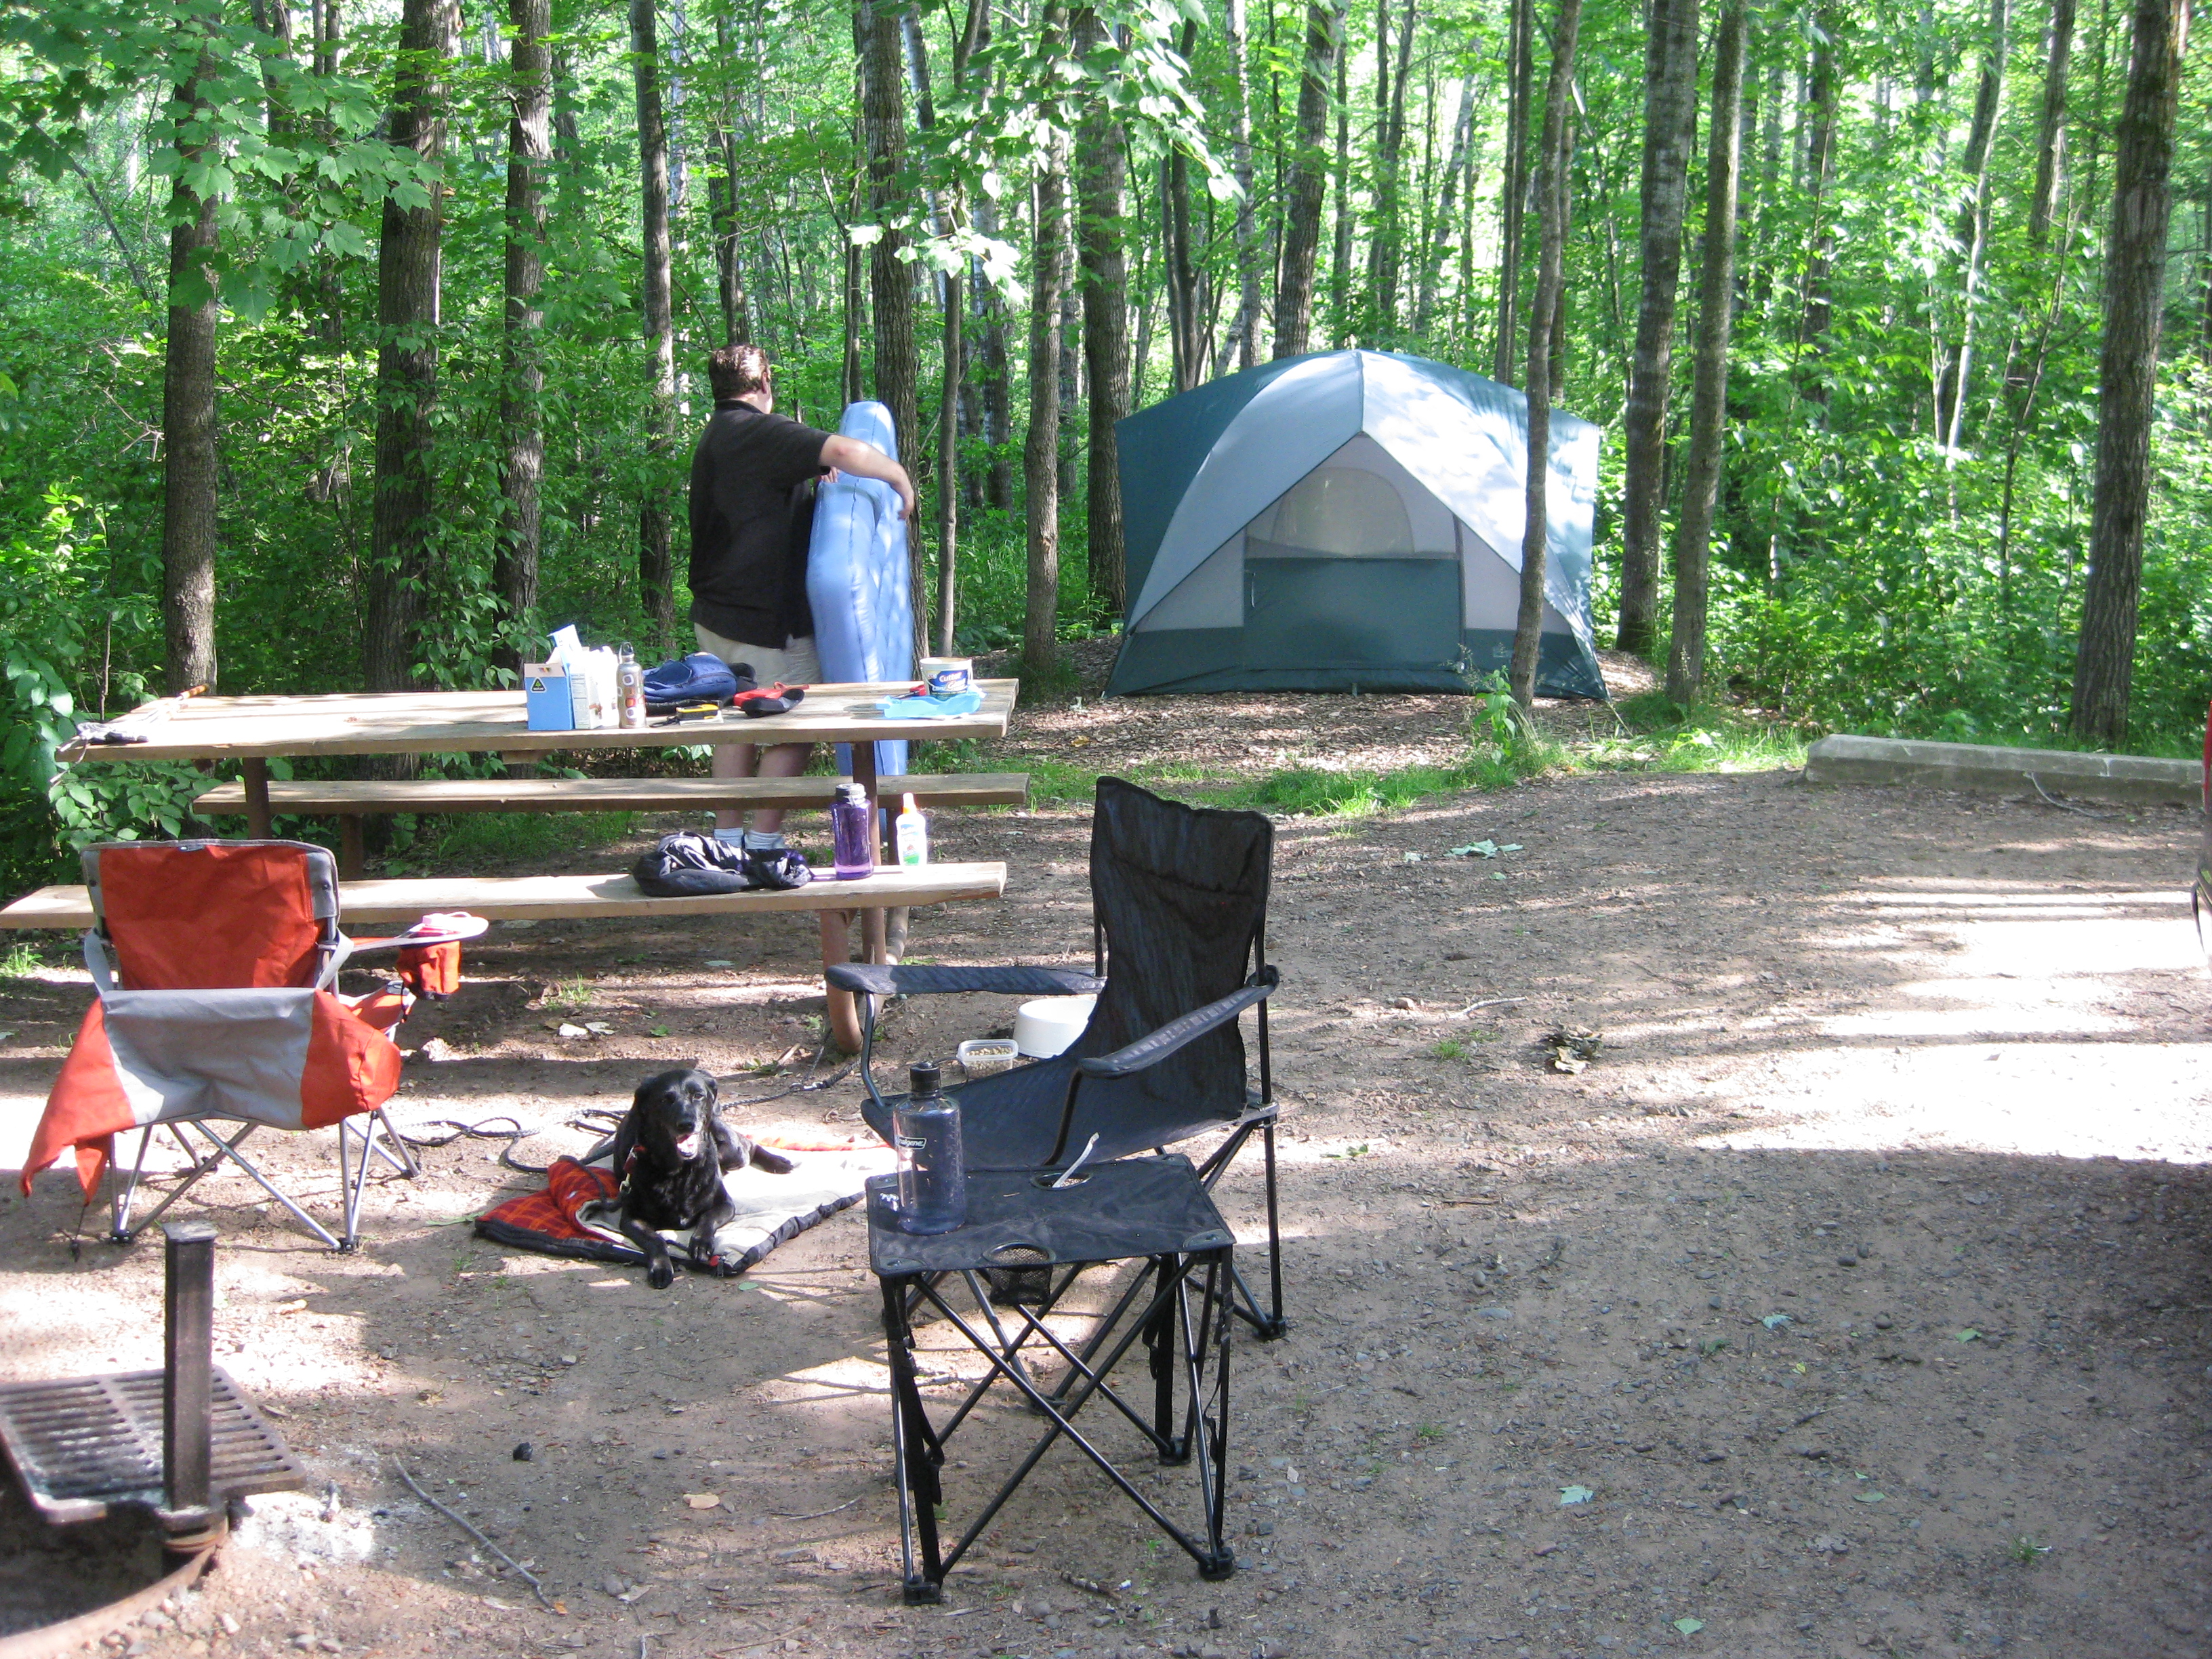 Banning State Park: camping and hiking the Quarry Loop Trail | Minnesota Camping & Hiking